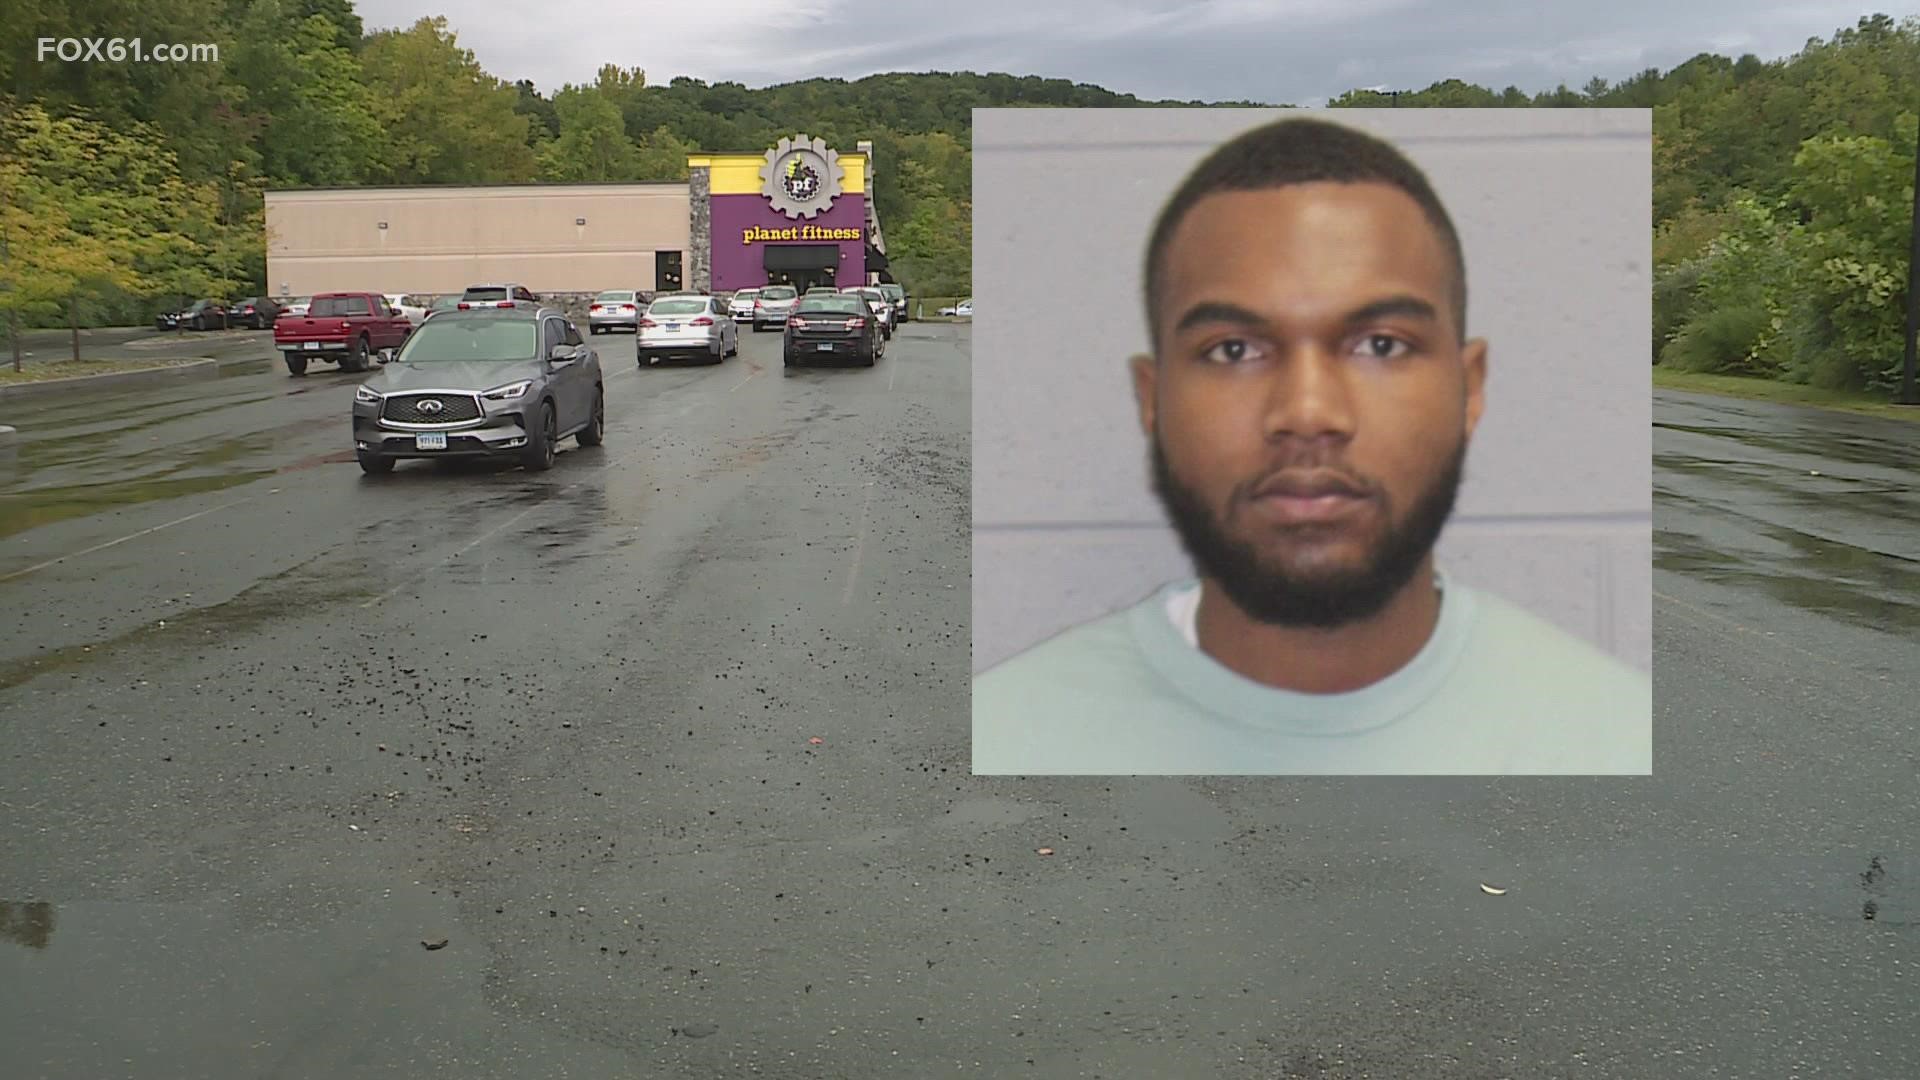 A Planet Fitness manager in Naugatuck has turned himself in to police after a report indicated he was recording a gymgoer in a changing area.